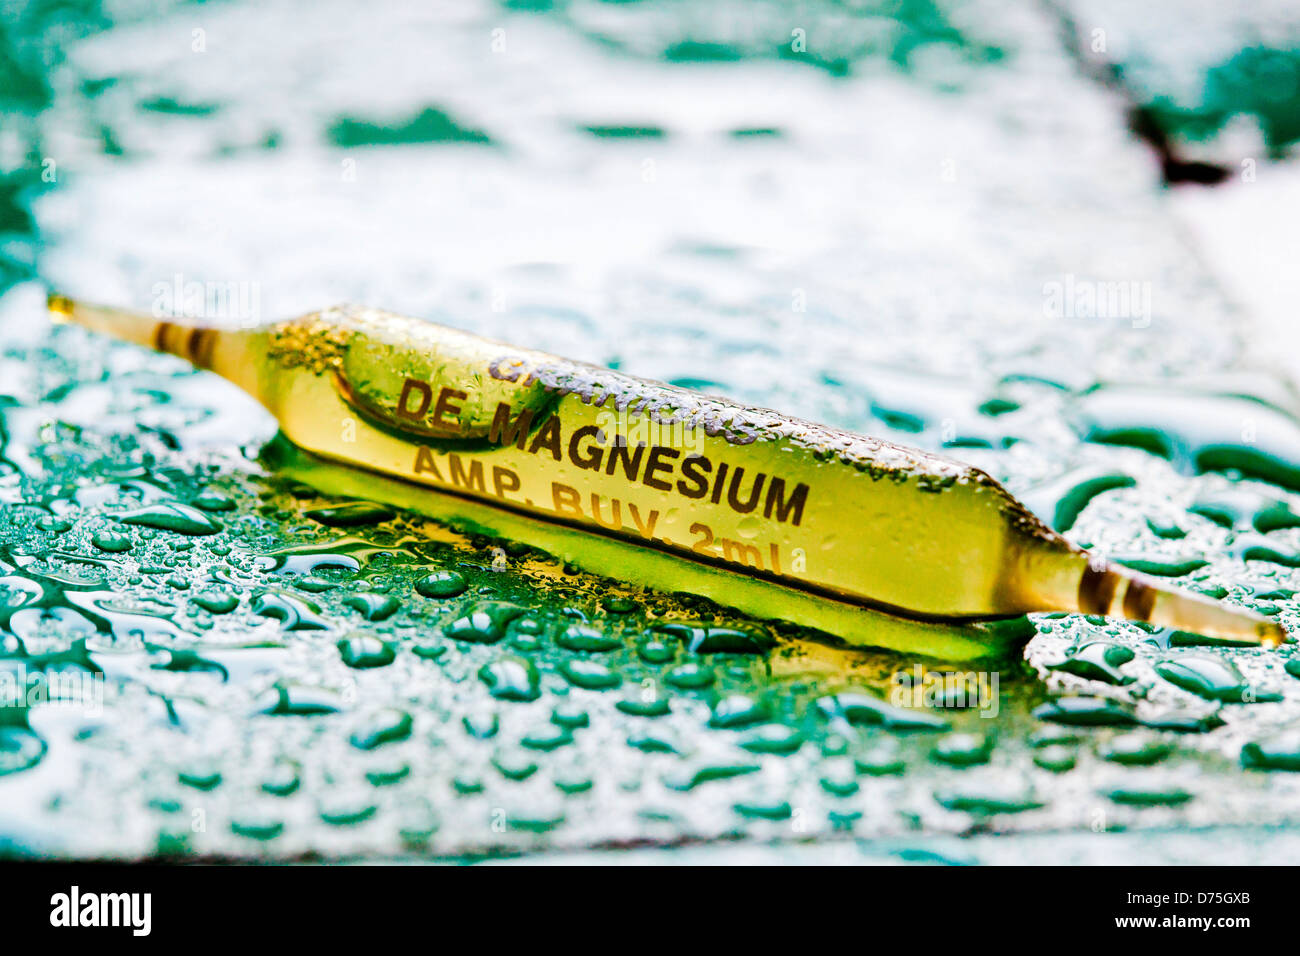 Glass ampoule of magnesium. Stock Photo